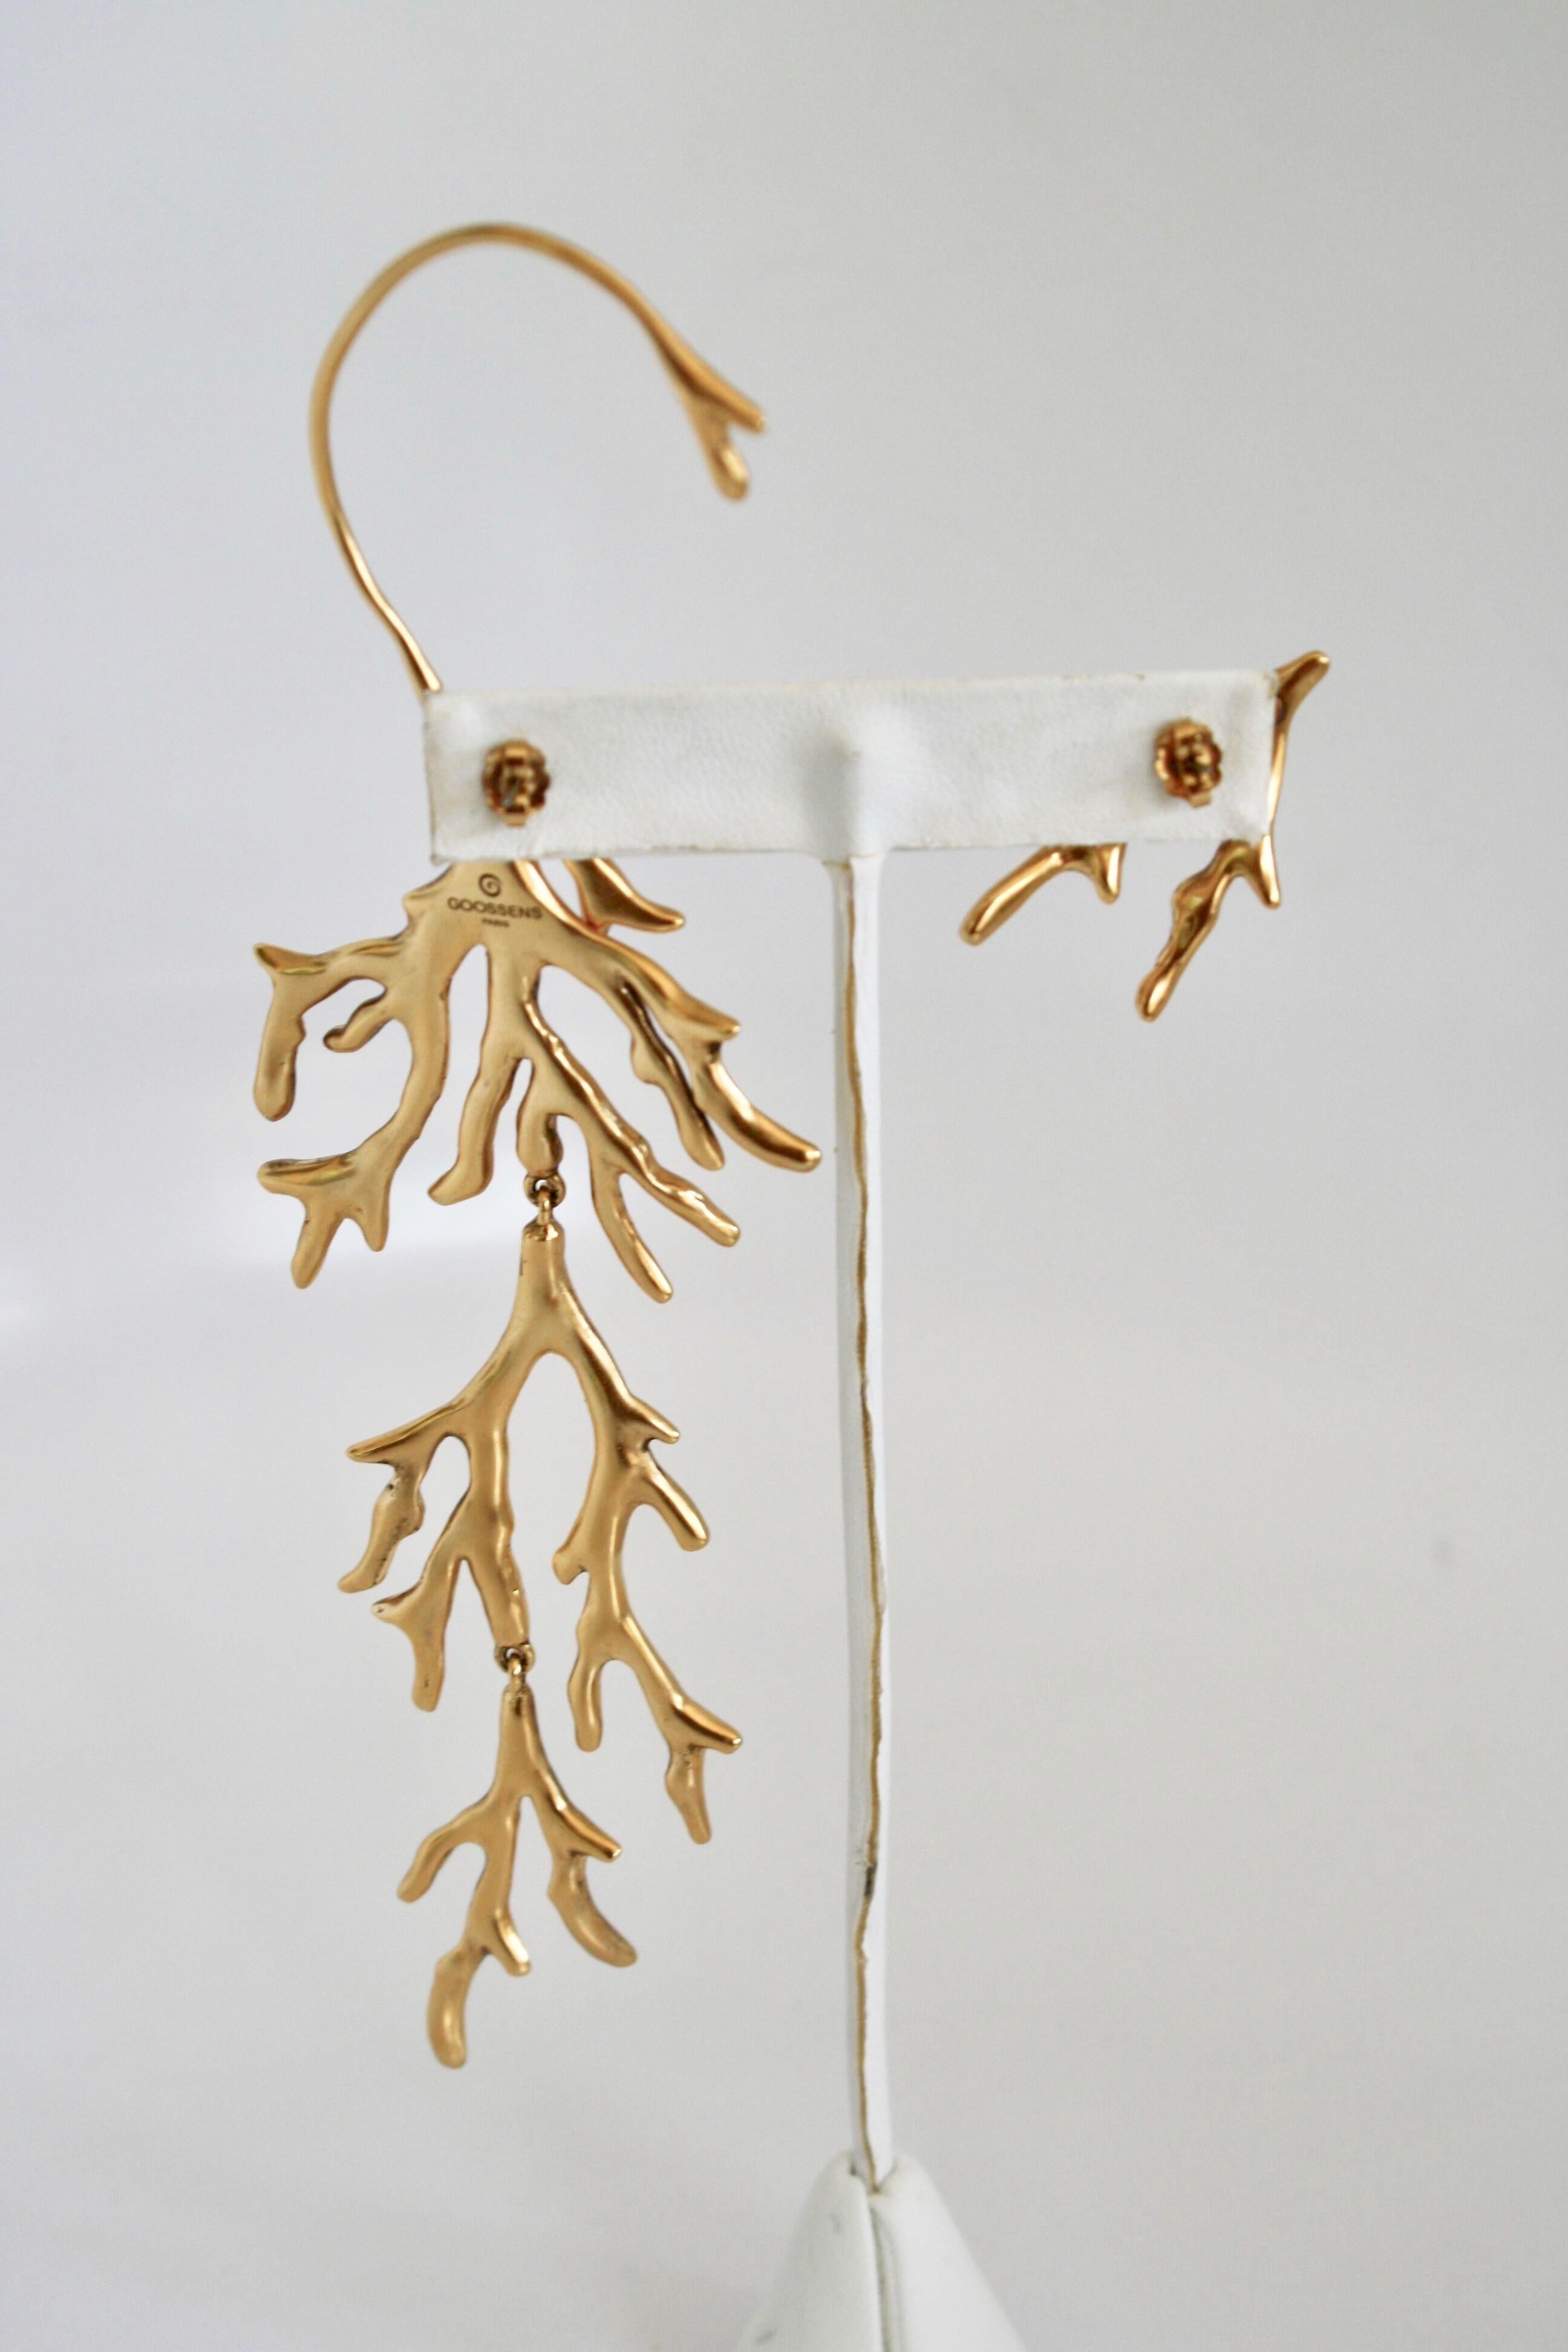 The House of Goossens revisits the iconic themes of its founder, Robert Goossens: coral, shell, leaves and water lilies. These asymmetrical metal earrings are tempered in a bath of 24 carat gold and adorned with a branch of coral, a call-back to